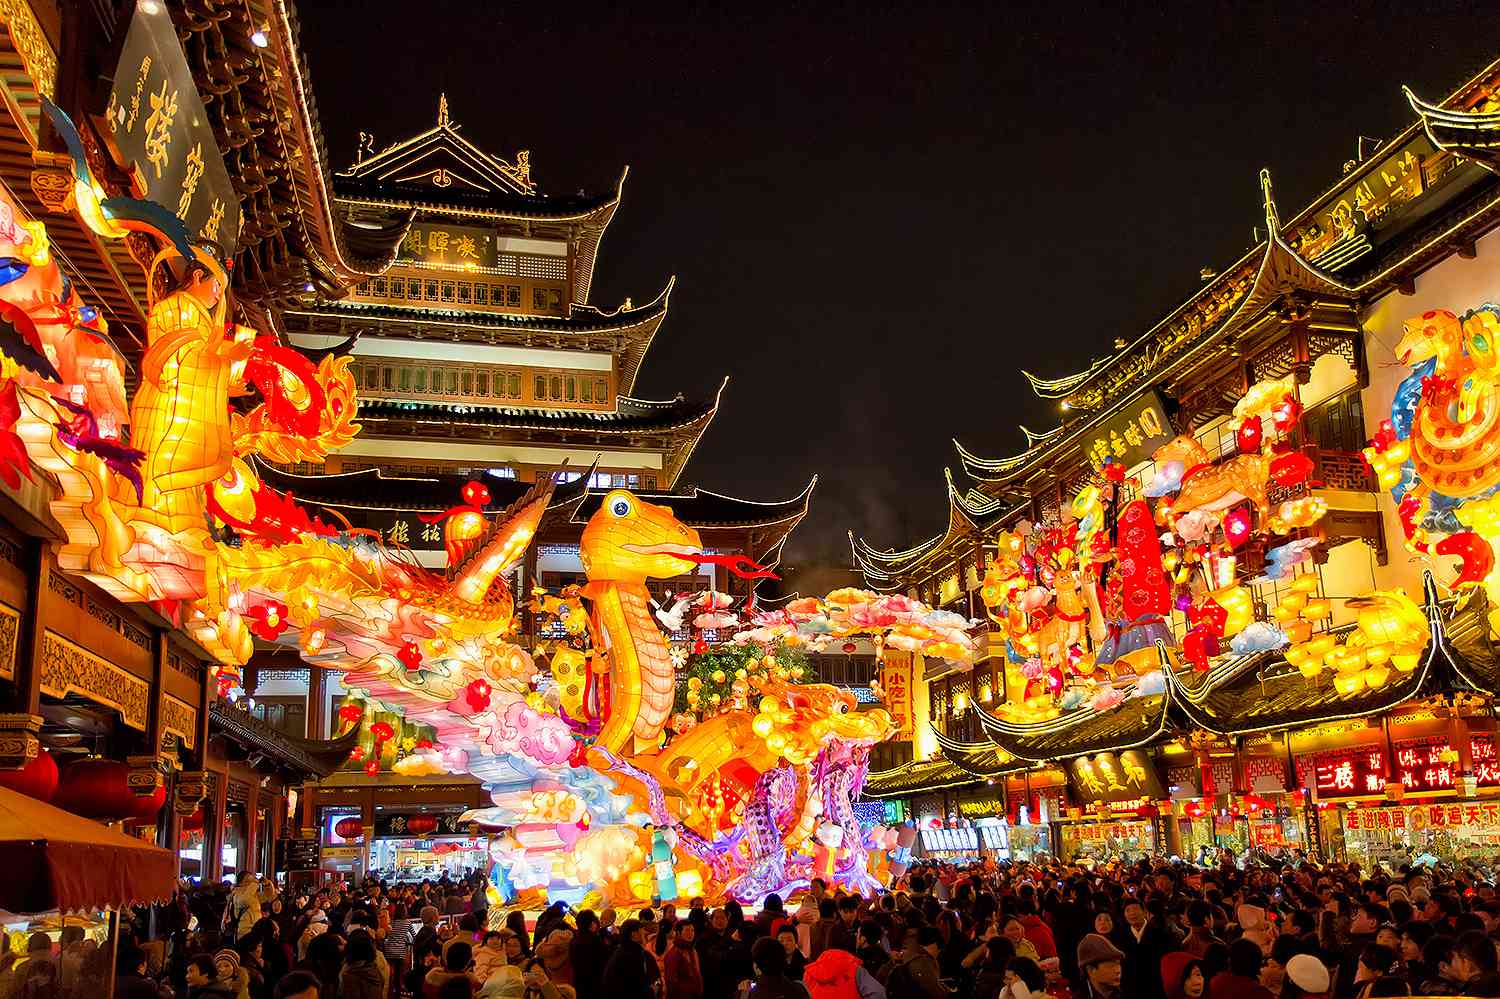 Most Colourful Festivals, Most Colourful Festivals around the world, Colorful Festivals